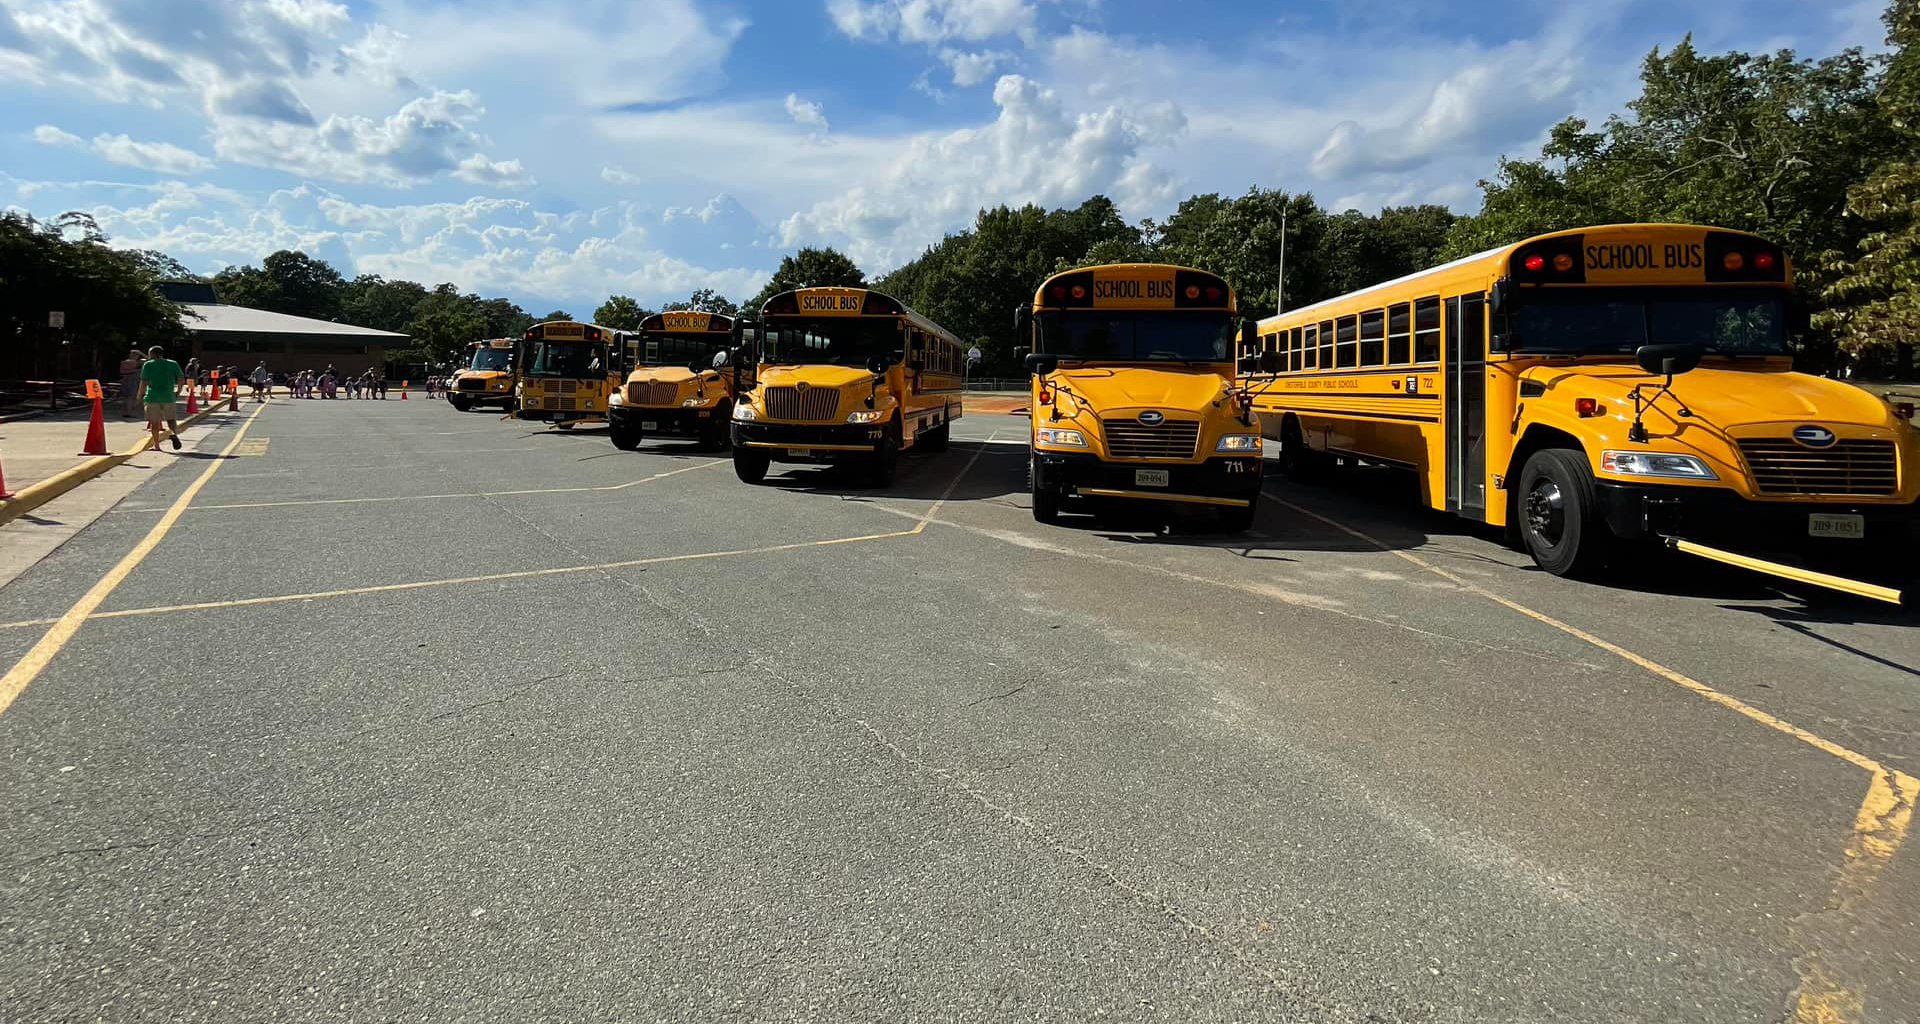 Buses lined up in front of school.